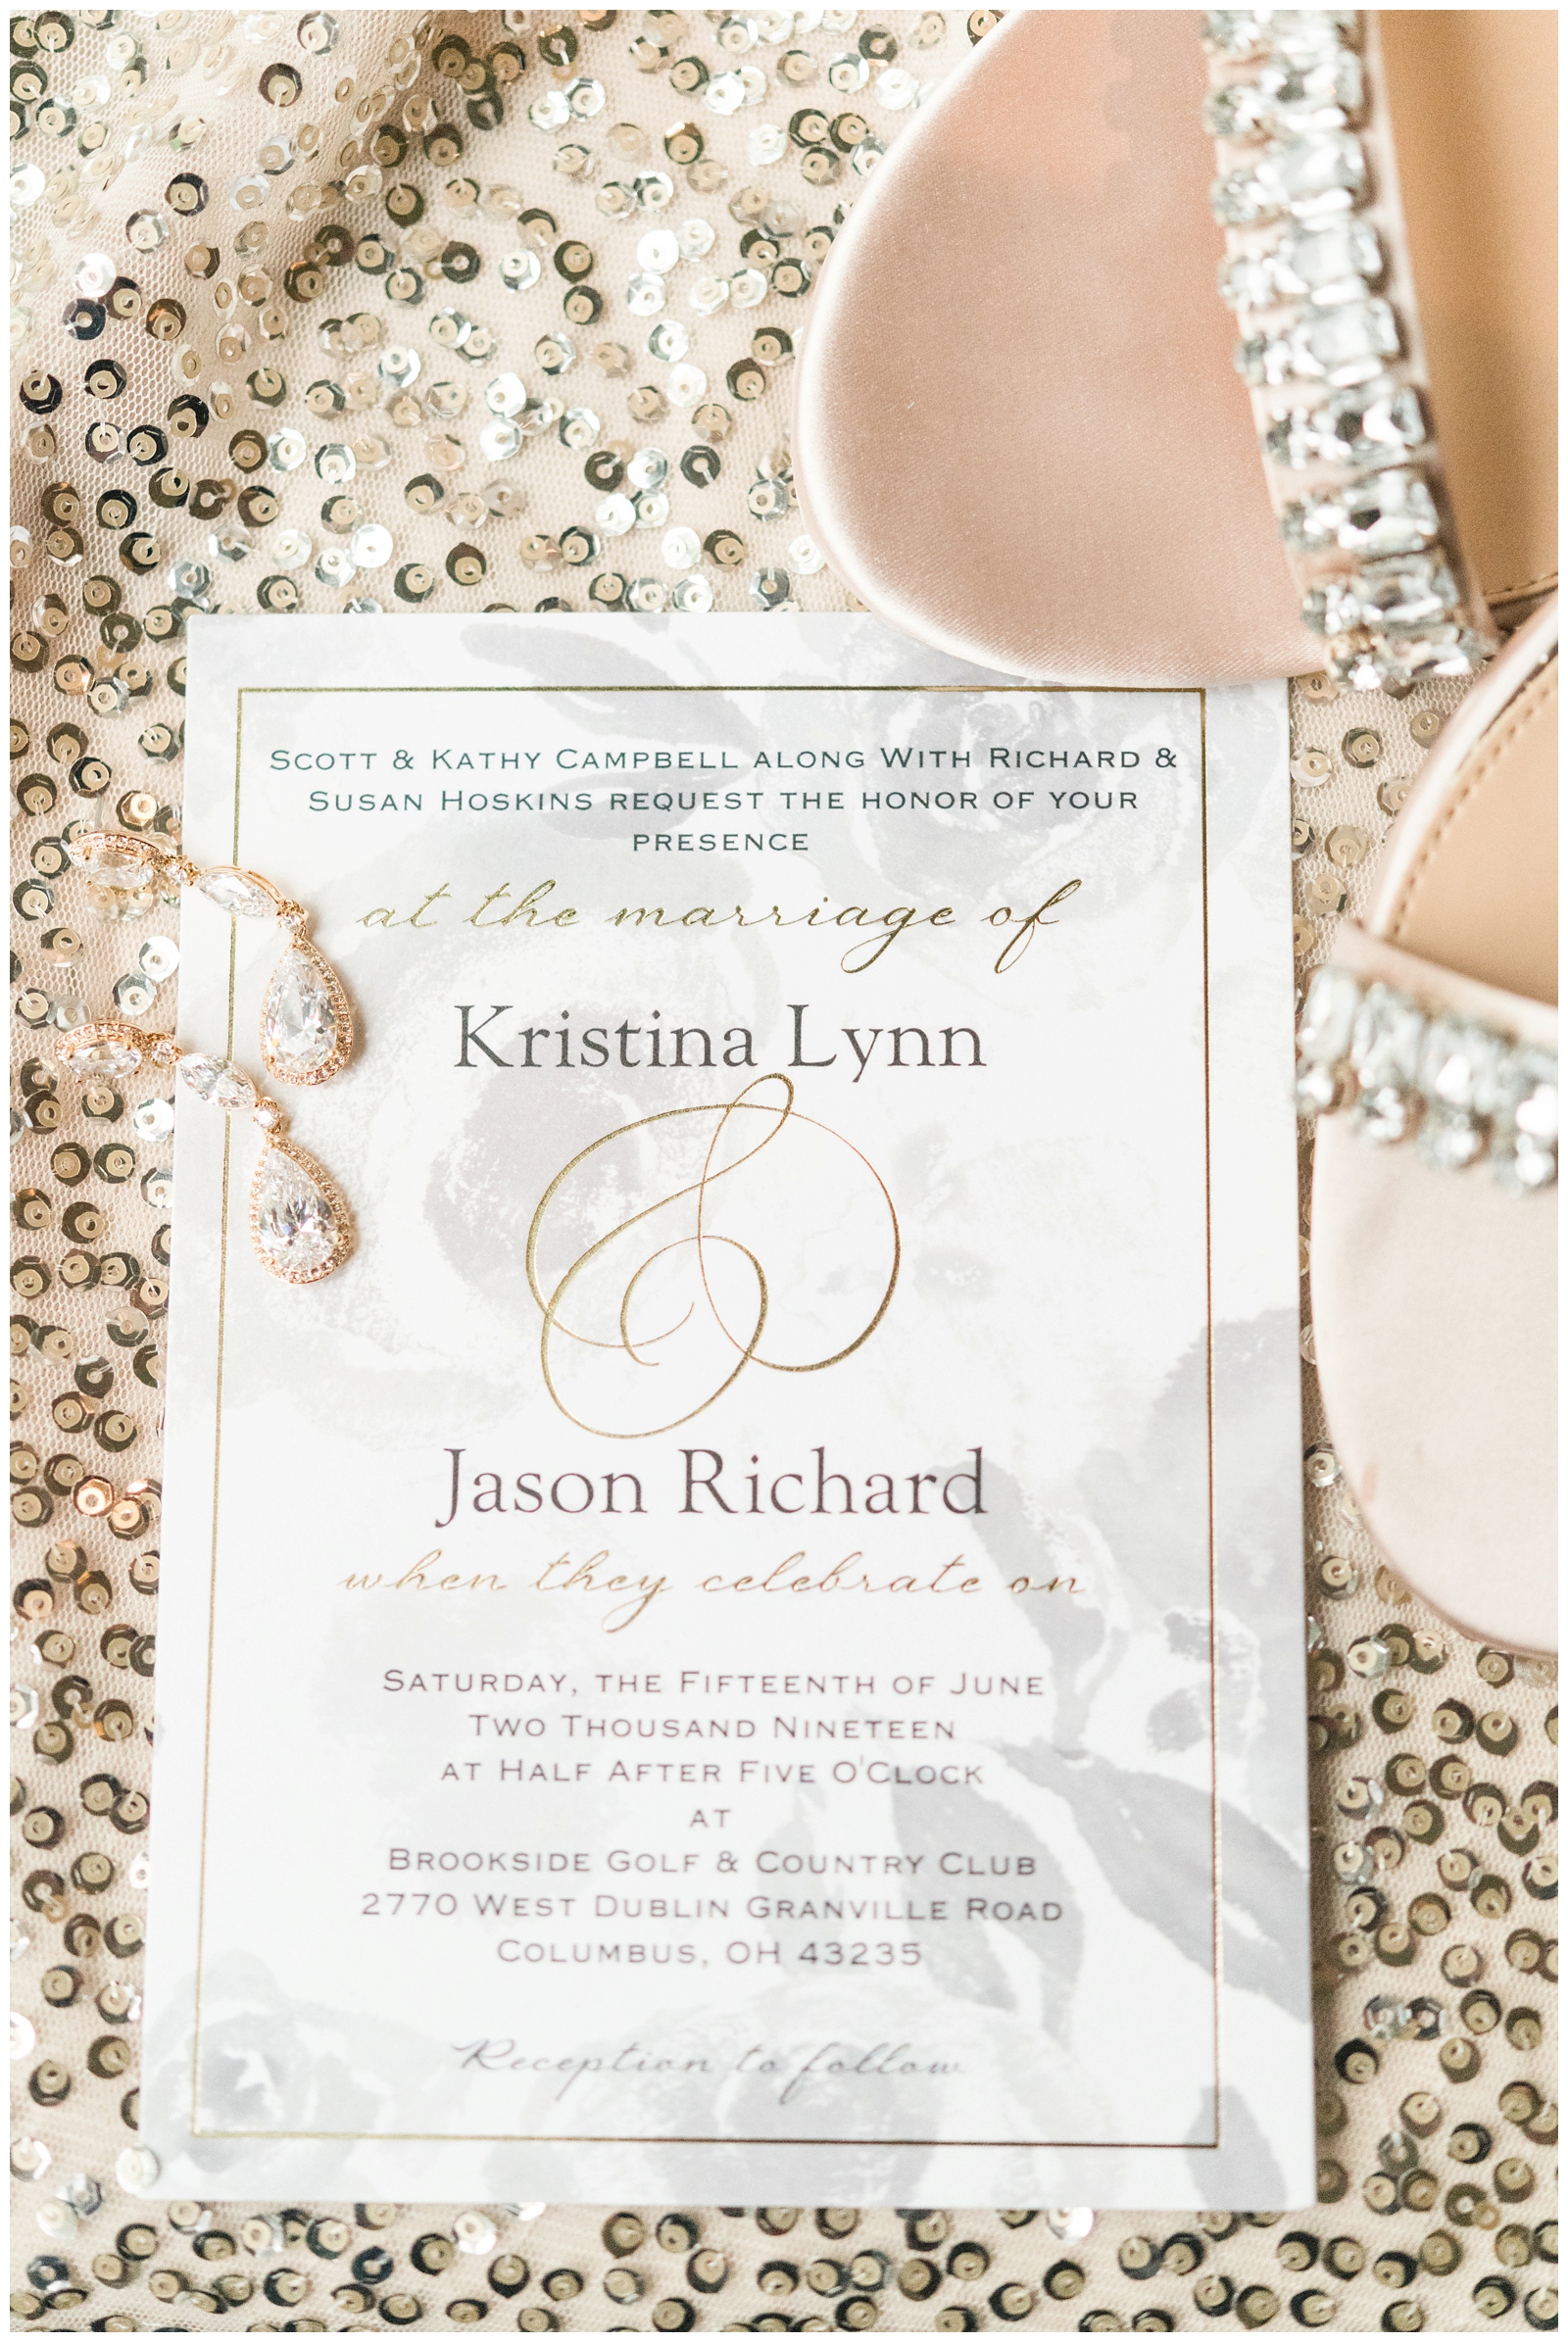 classic gold and ivory wedding invitation suite for Ohio wedding day photographed with bride's shoes